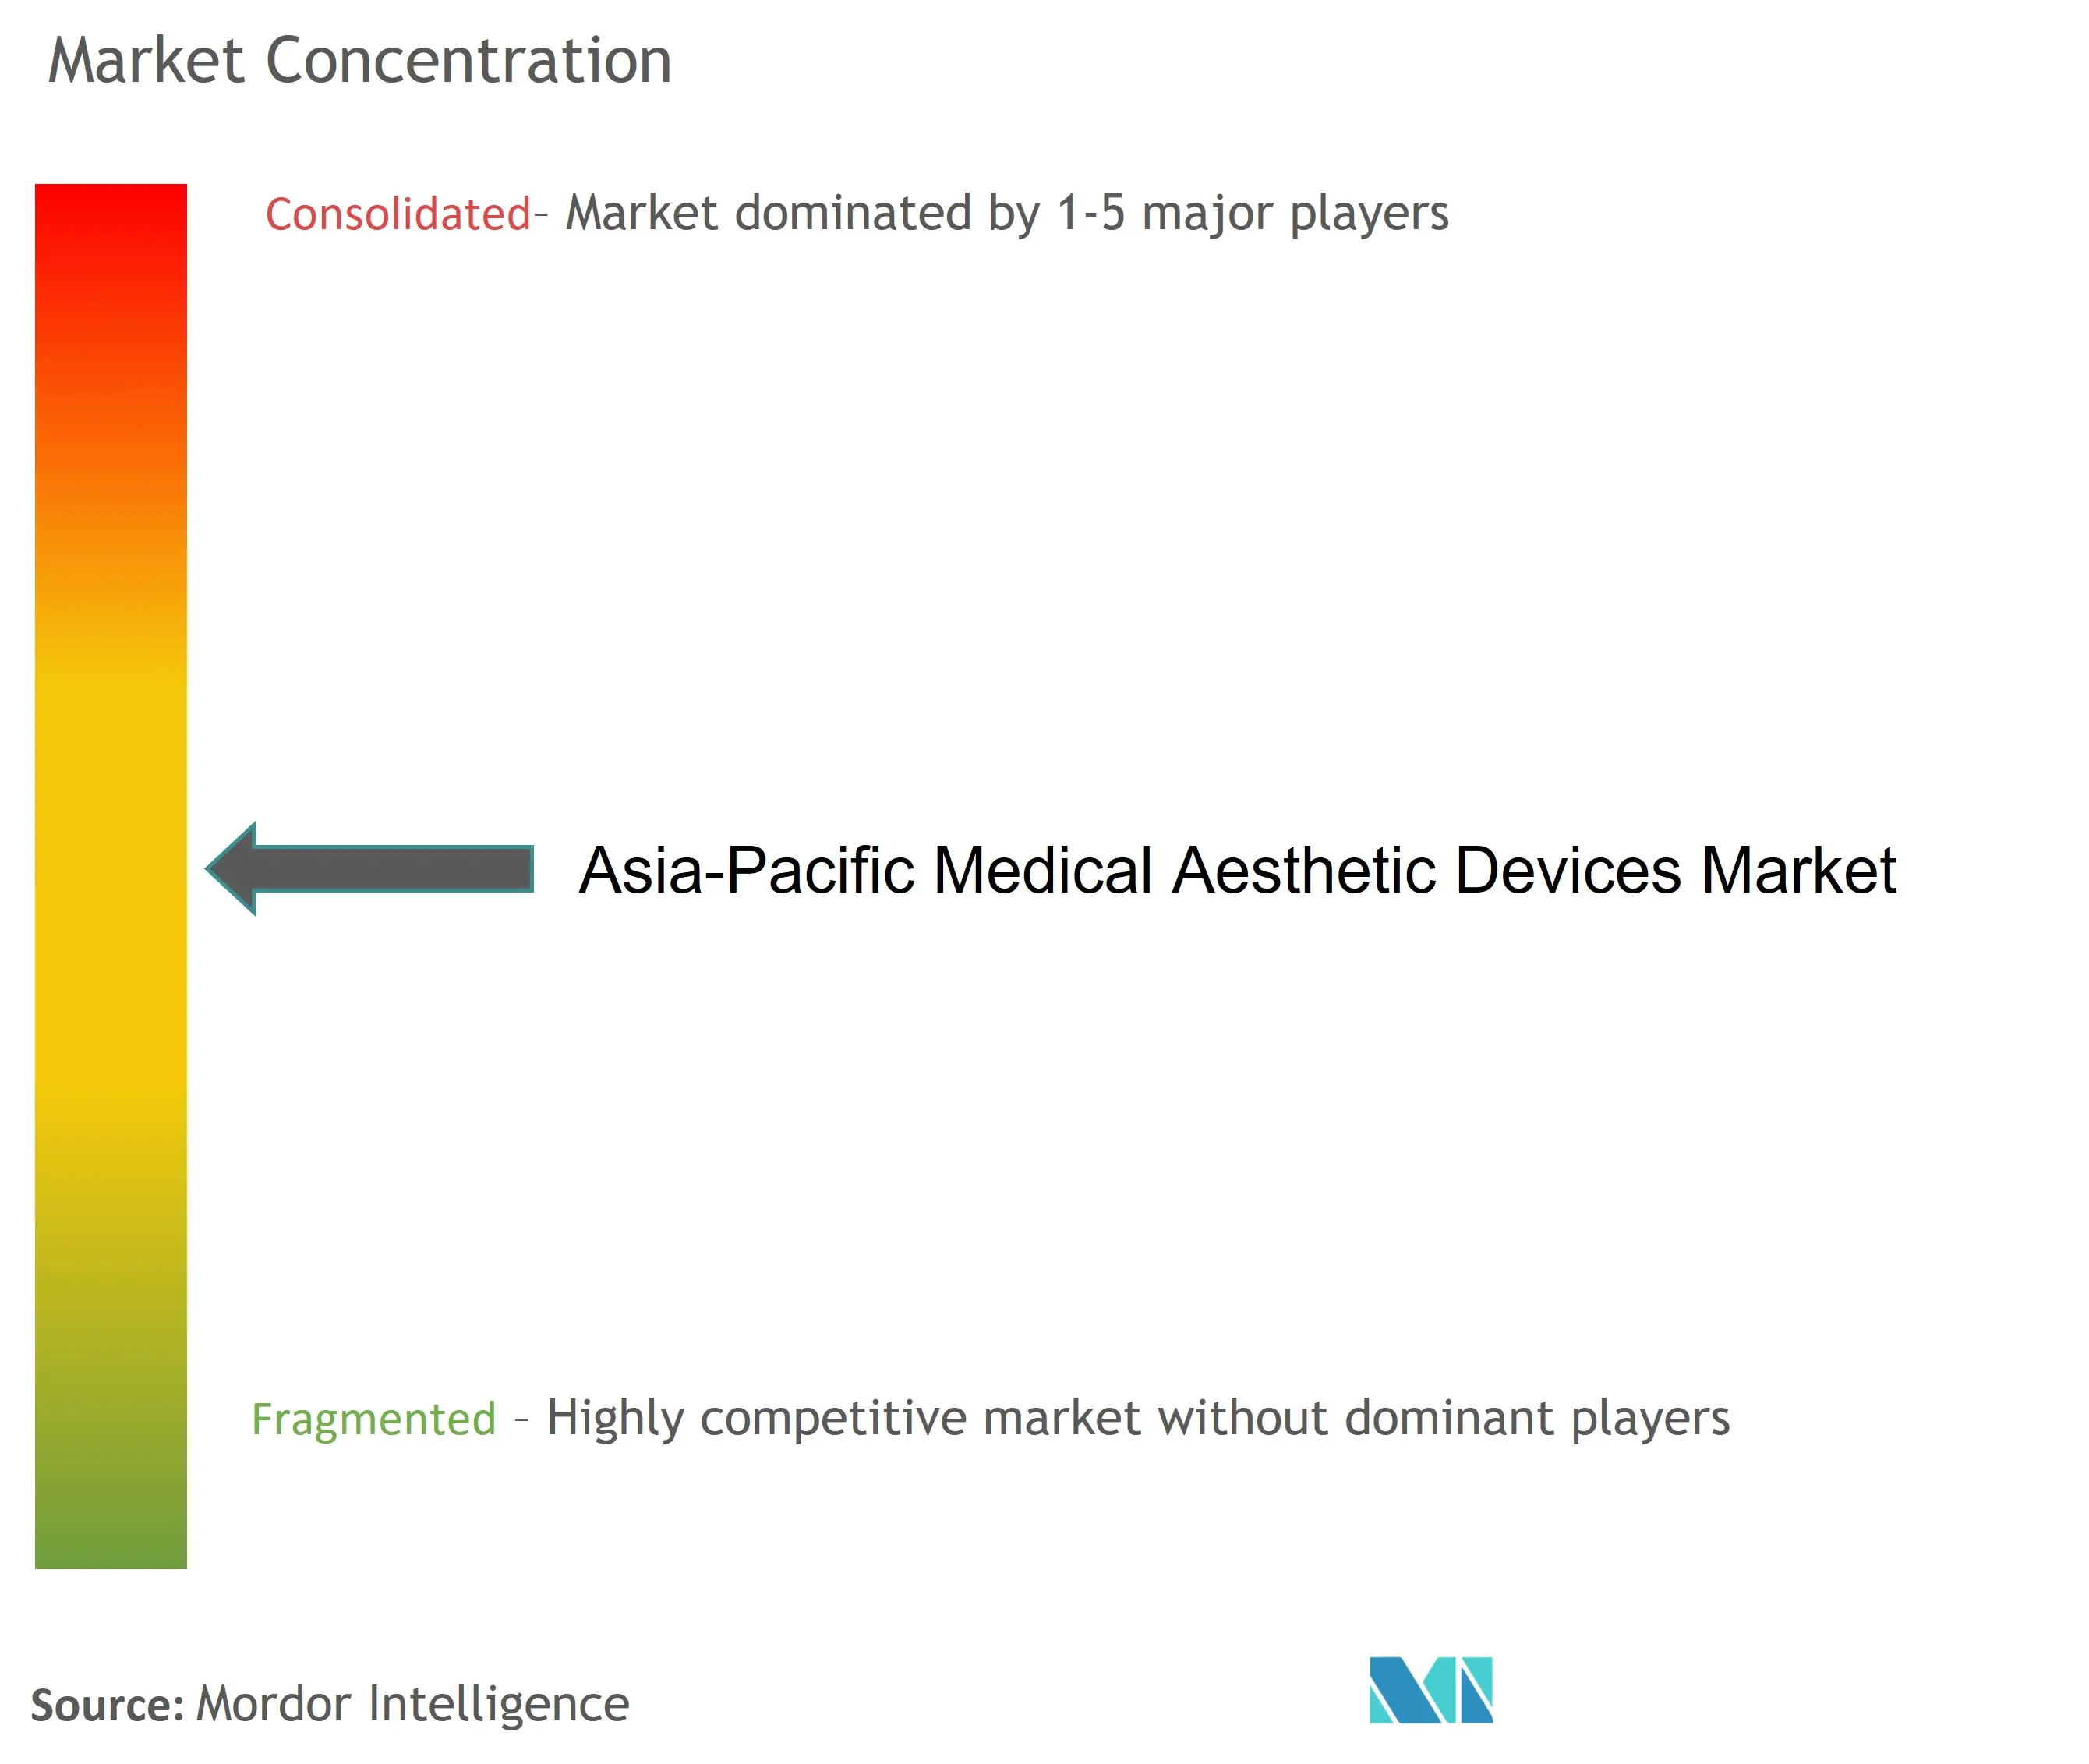 Asia-Pacific Medical Aesthetic Devices Market Concentration